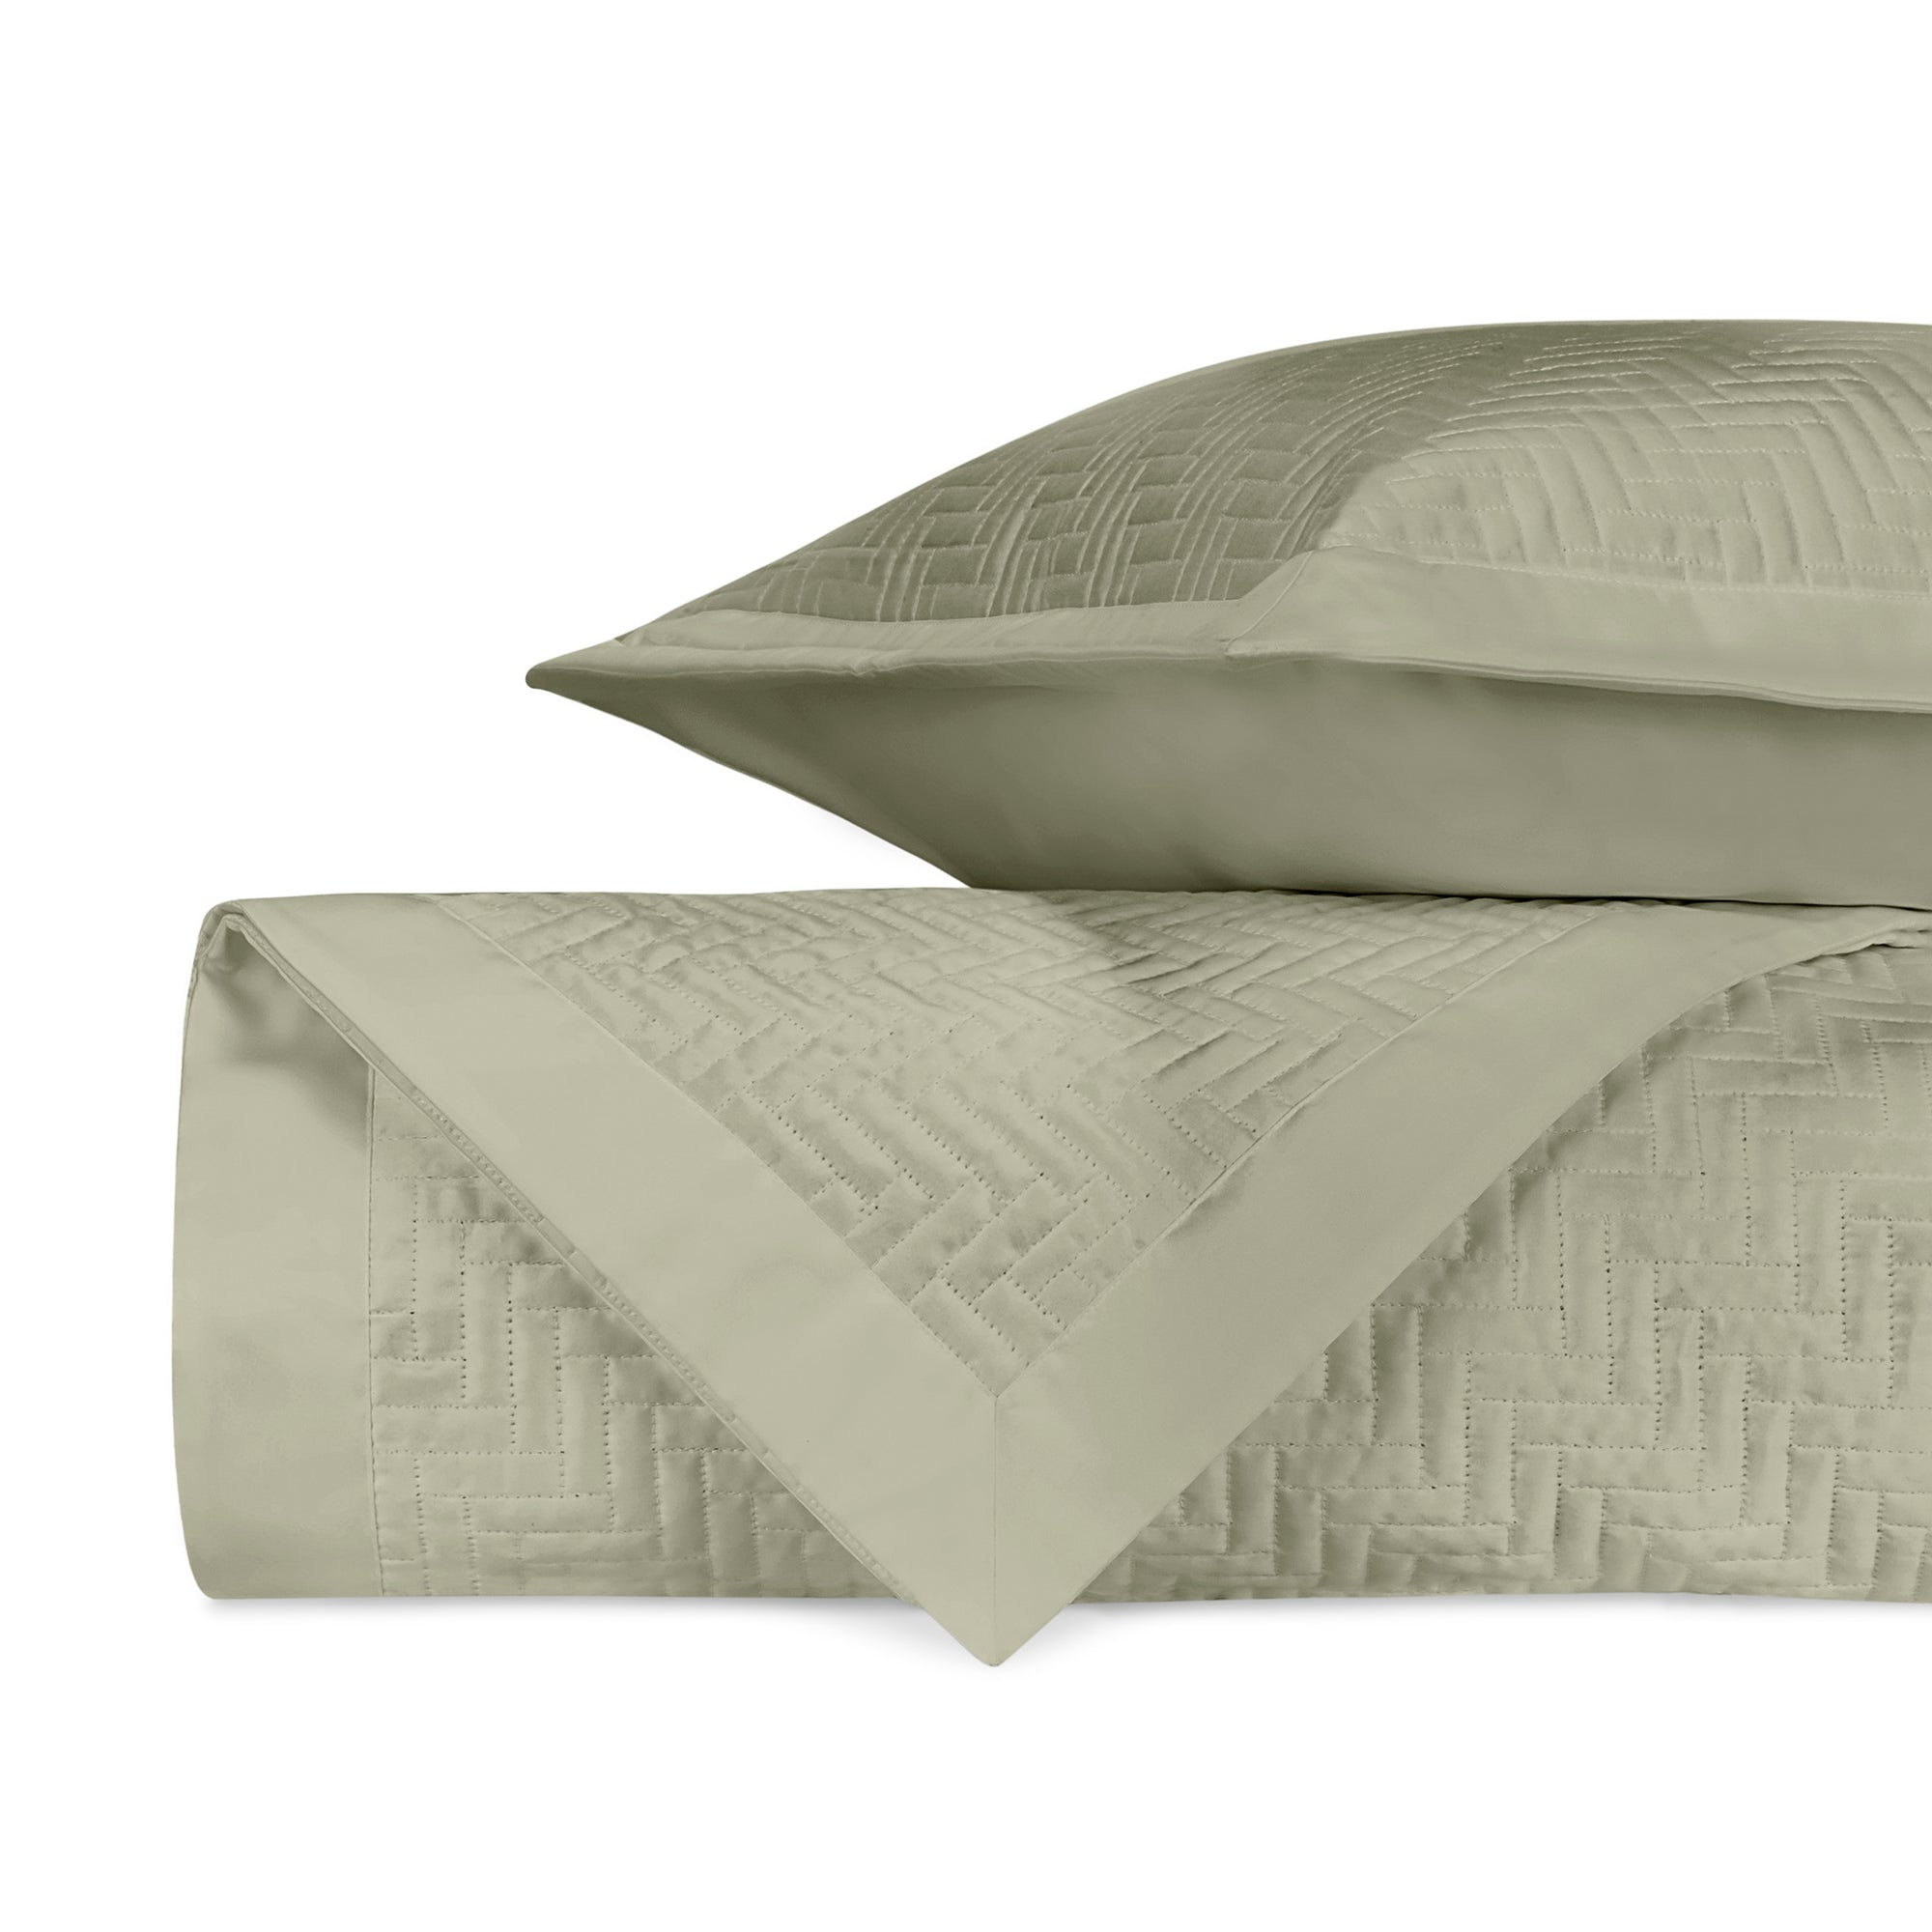 Stack Image of Home Treasures Baxter Royal Sateen Quilted Bedding in Color Crystal Green